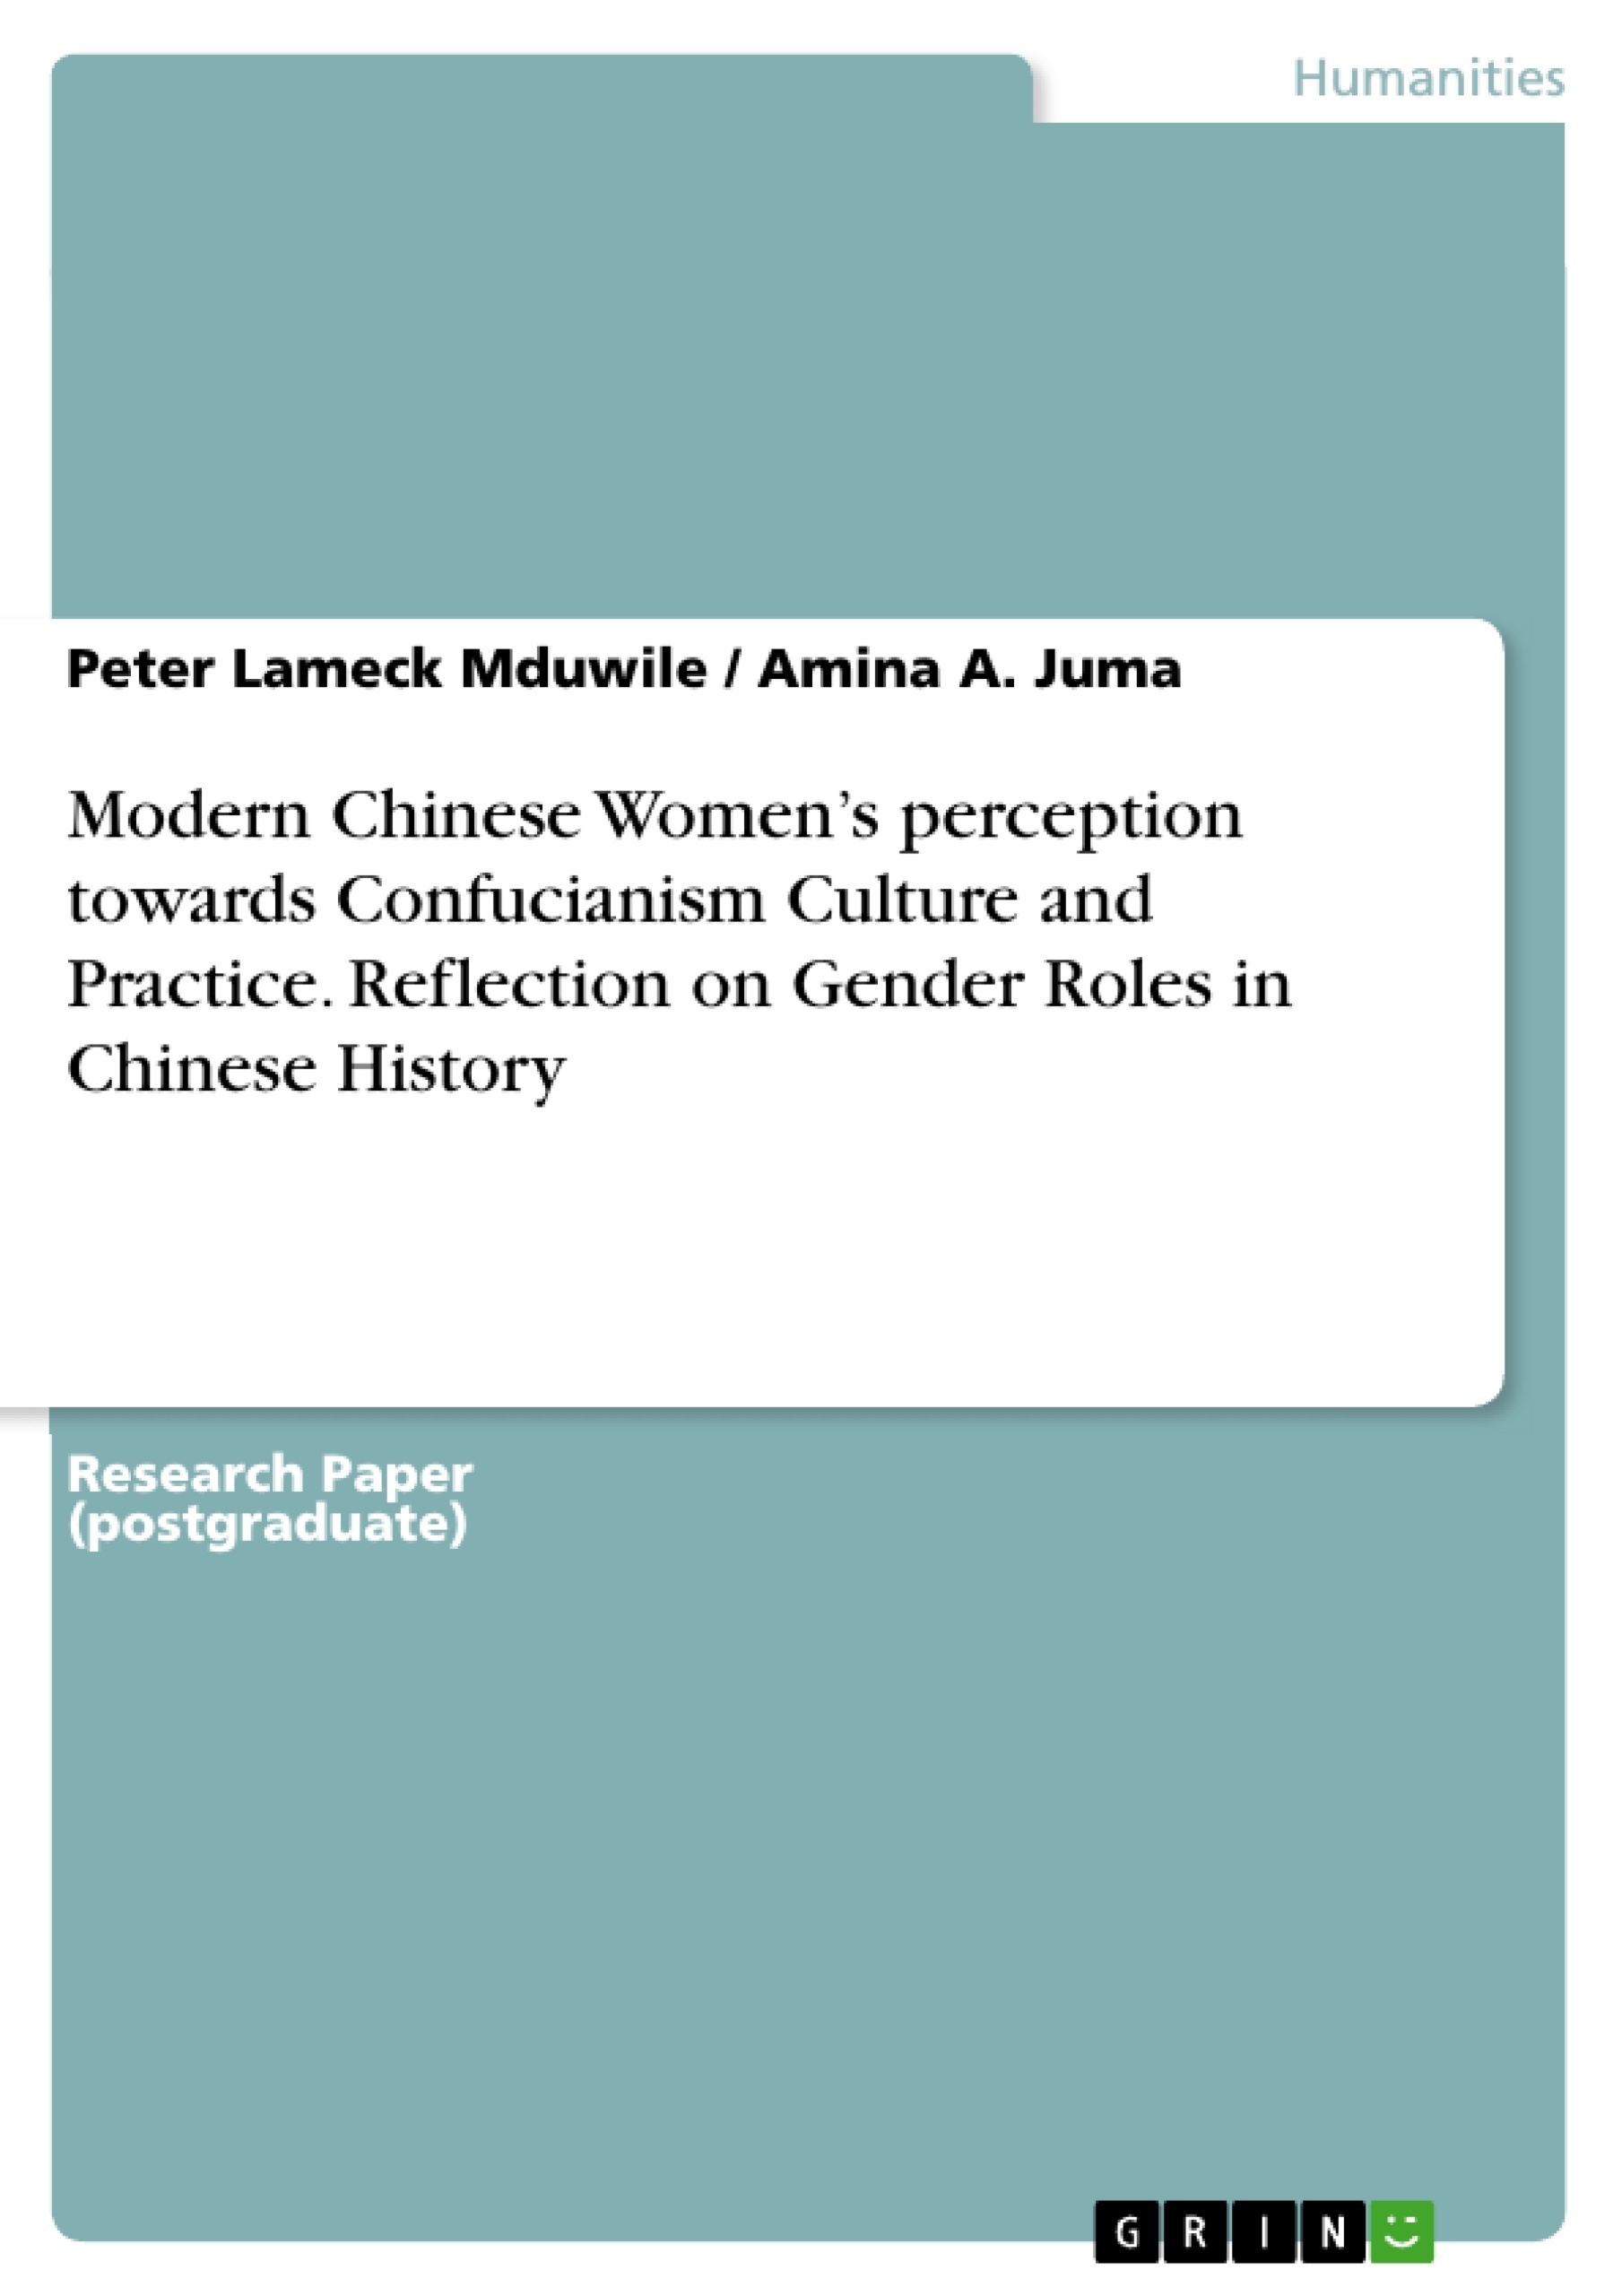 Title: Modern Chinese Women’s perception towards Confucianism Culture and Practice. Reflection on Gender Roles in Chinese History